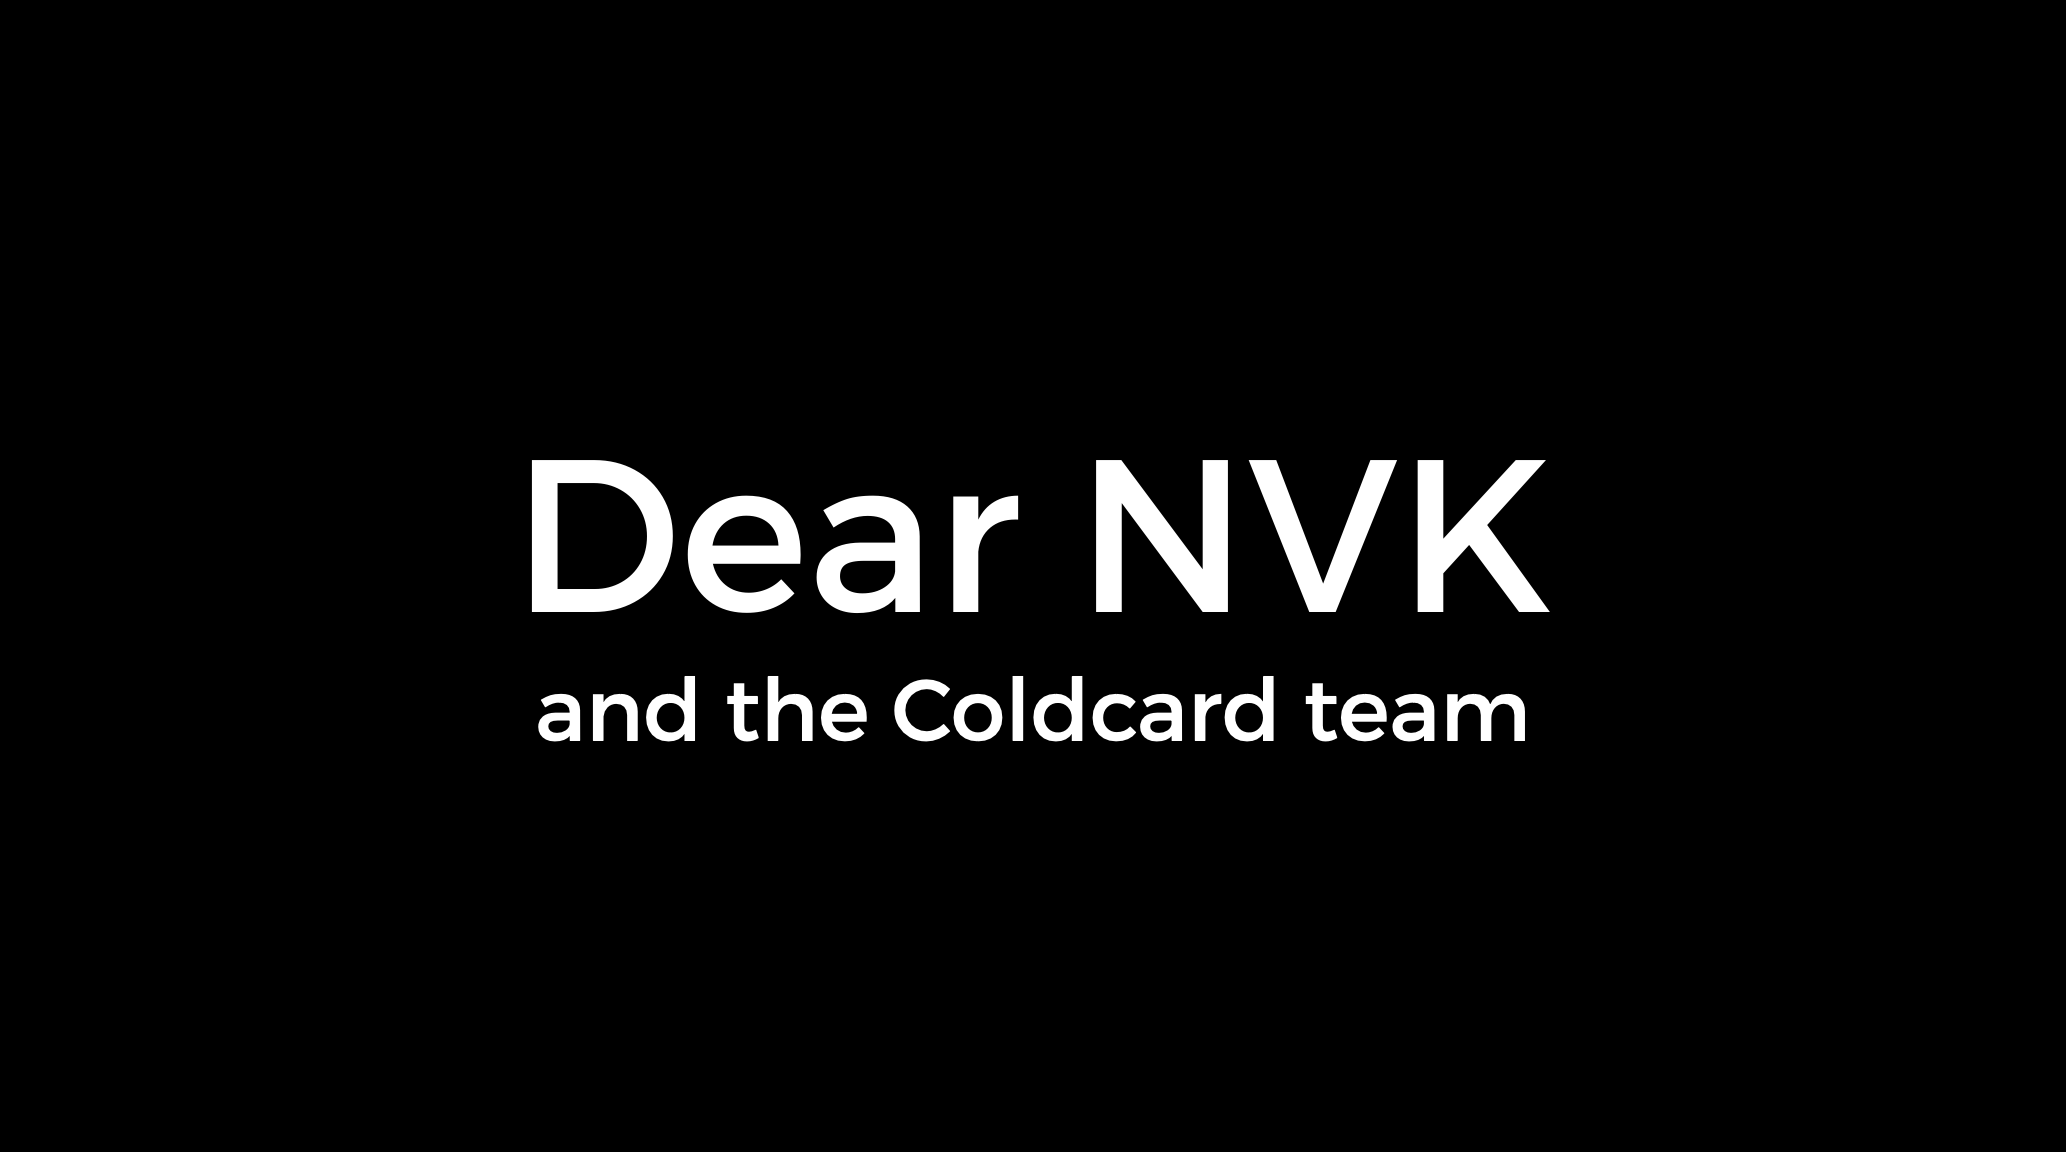 An Open Letter to NVK and Coldcard